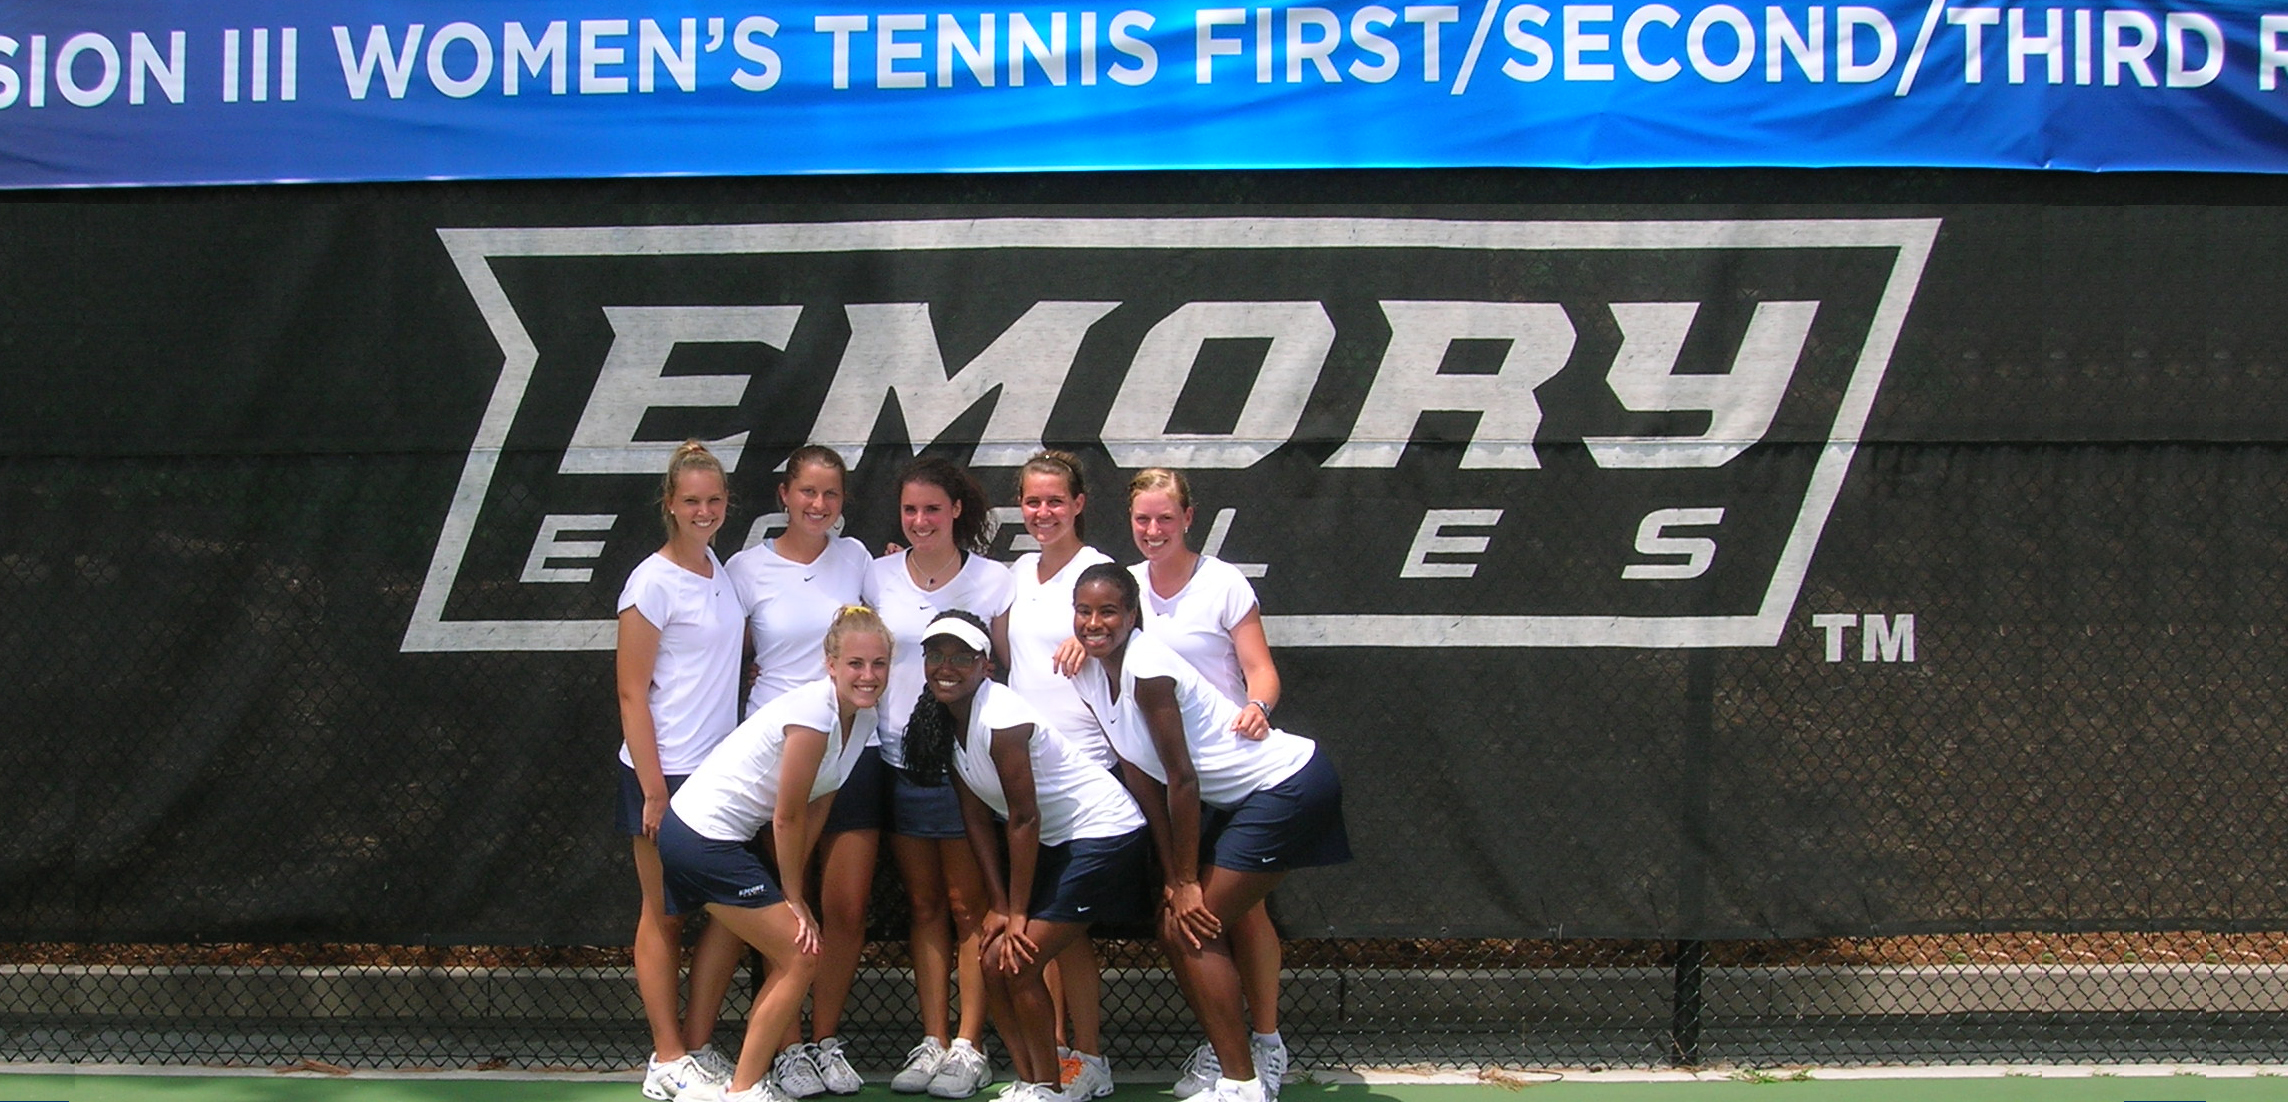 #4 Emory Women’s Tennis to Face #5 Denison at the NCAA Tournament Quarterfinals